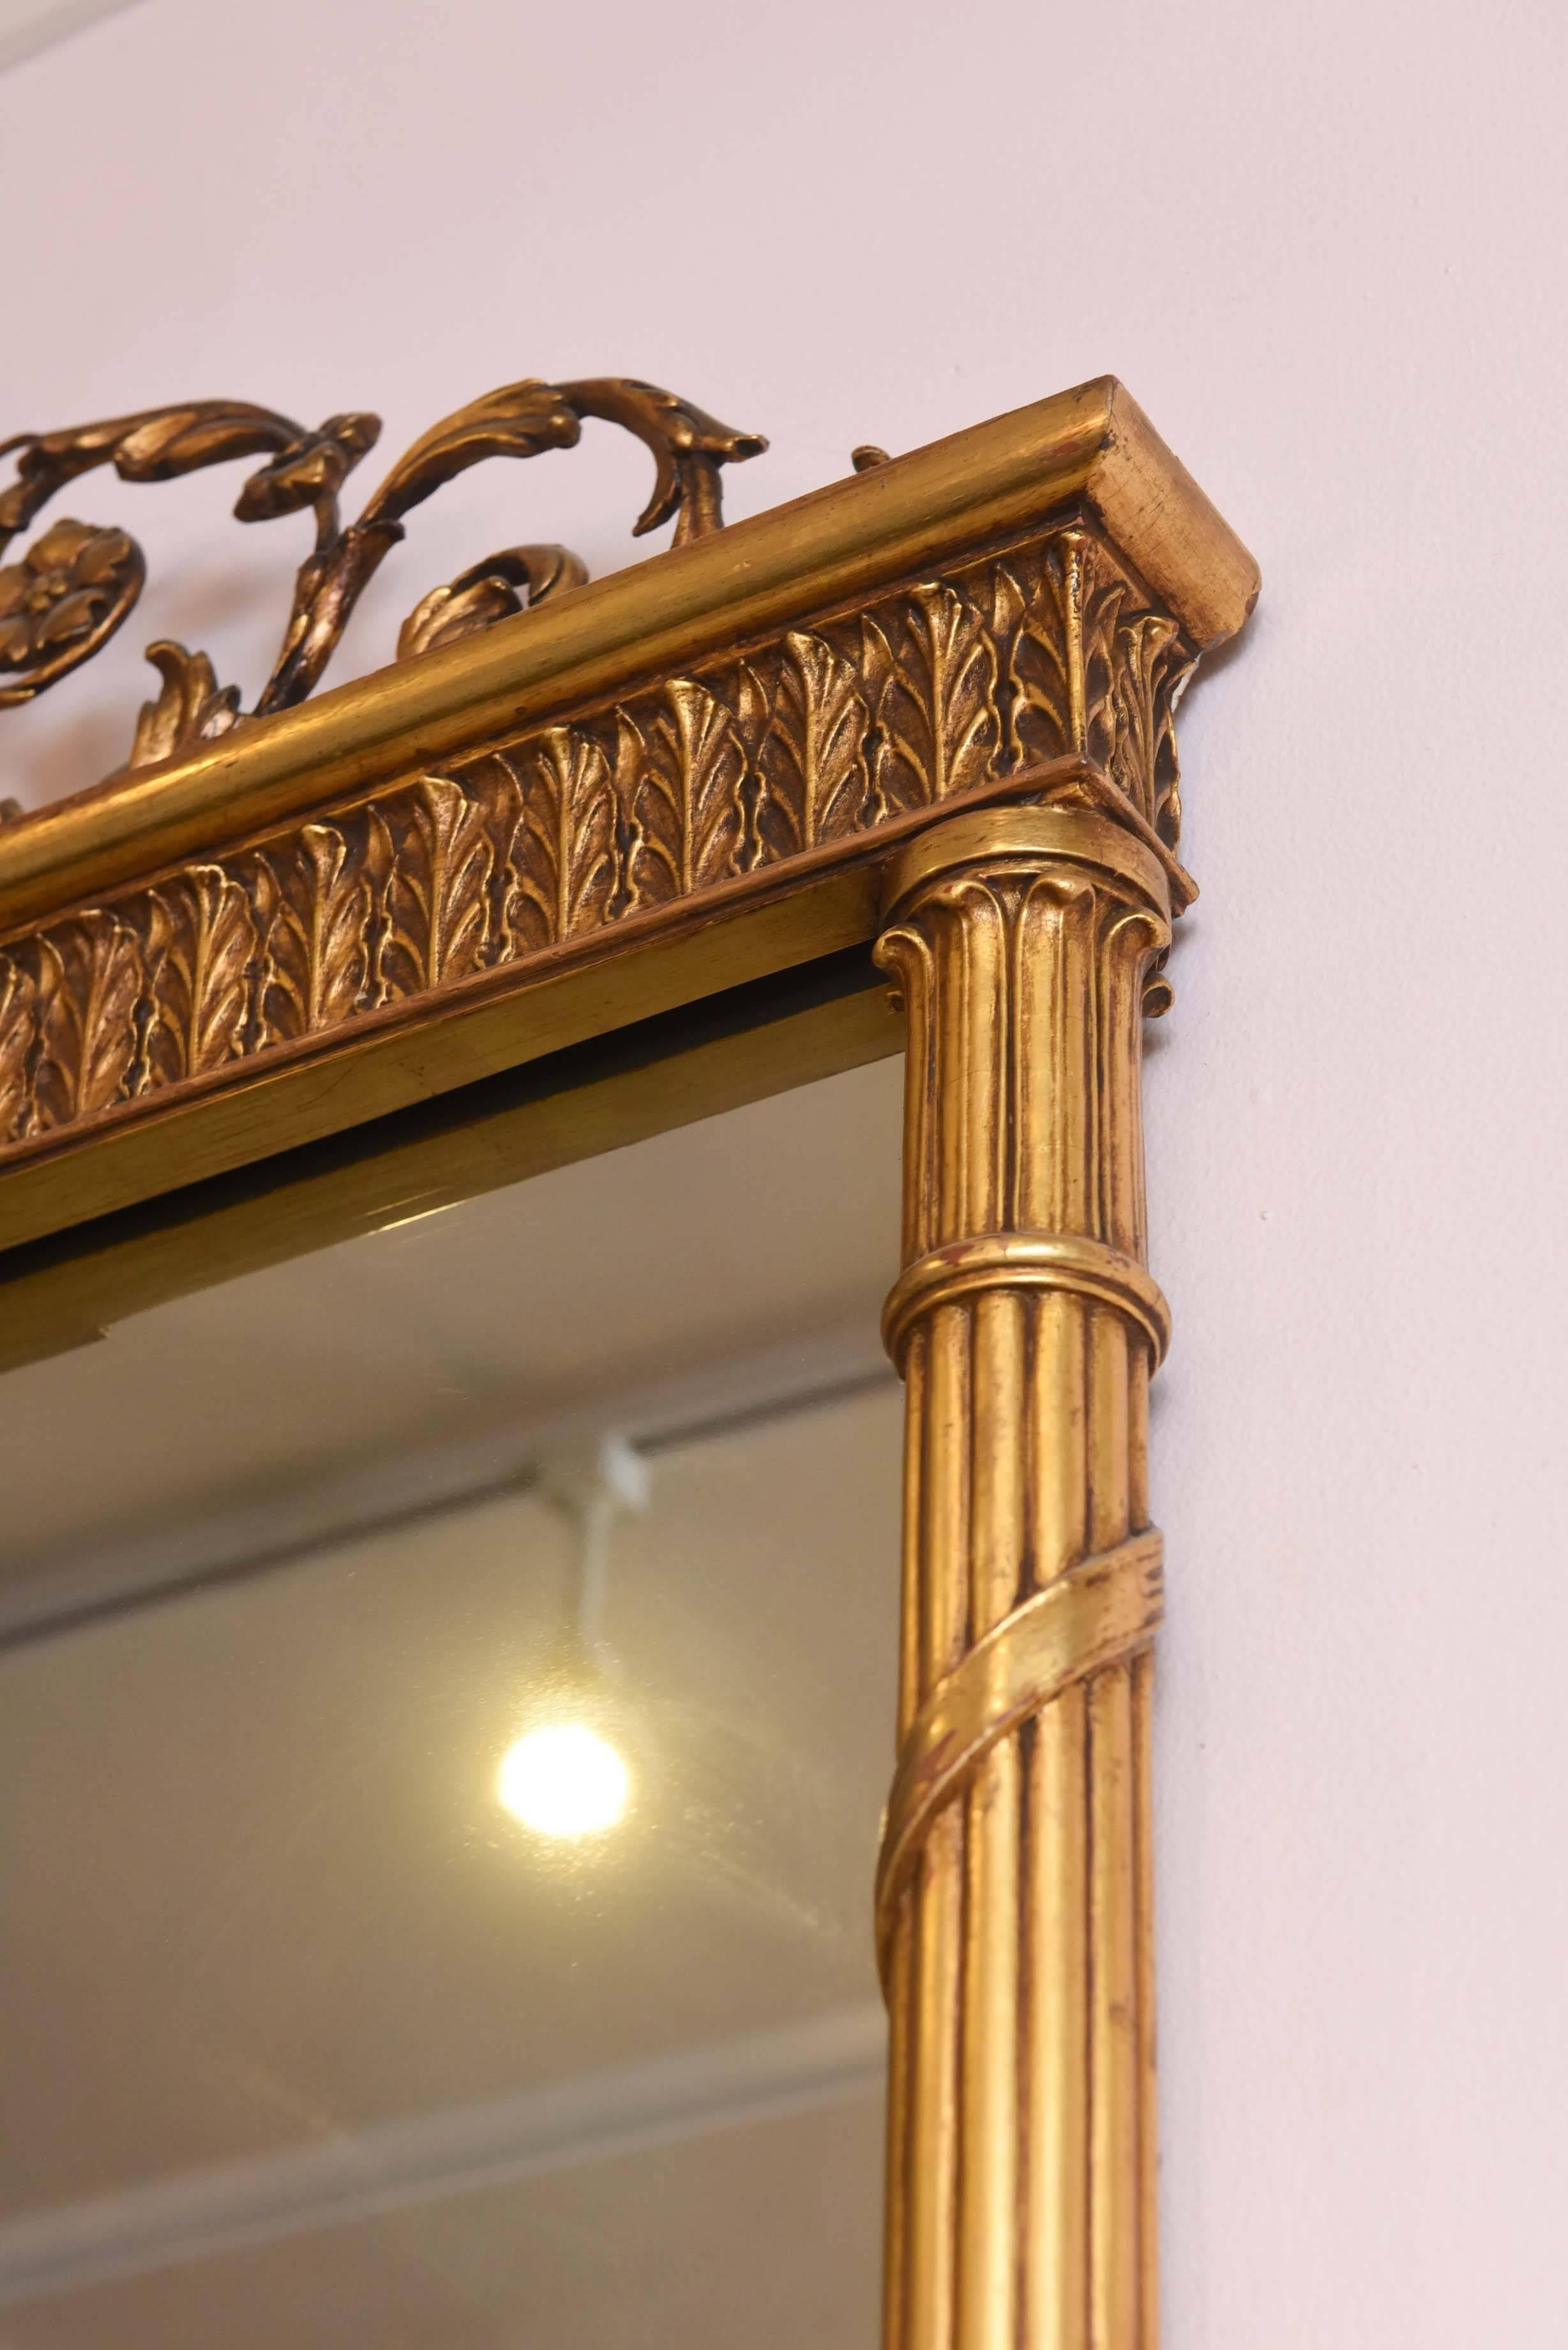 Early 20th Century Vintage Carved Giltwood and Polychrome Painted Mirror with Columns Urn Details